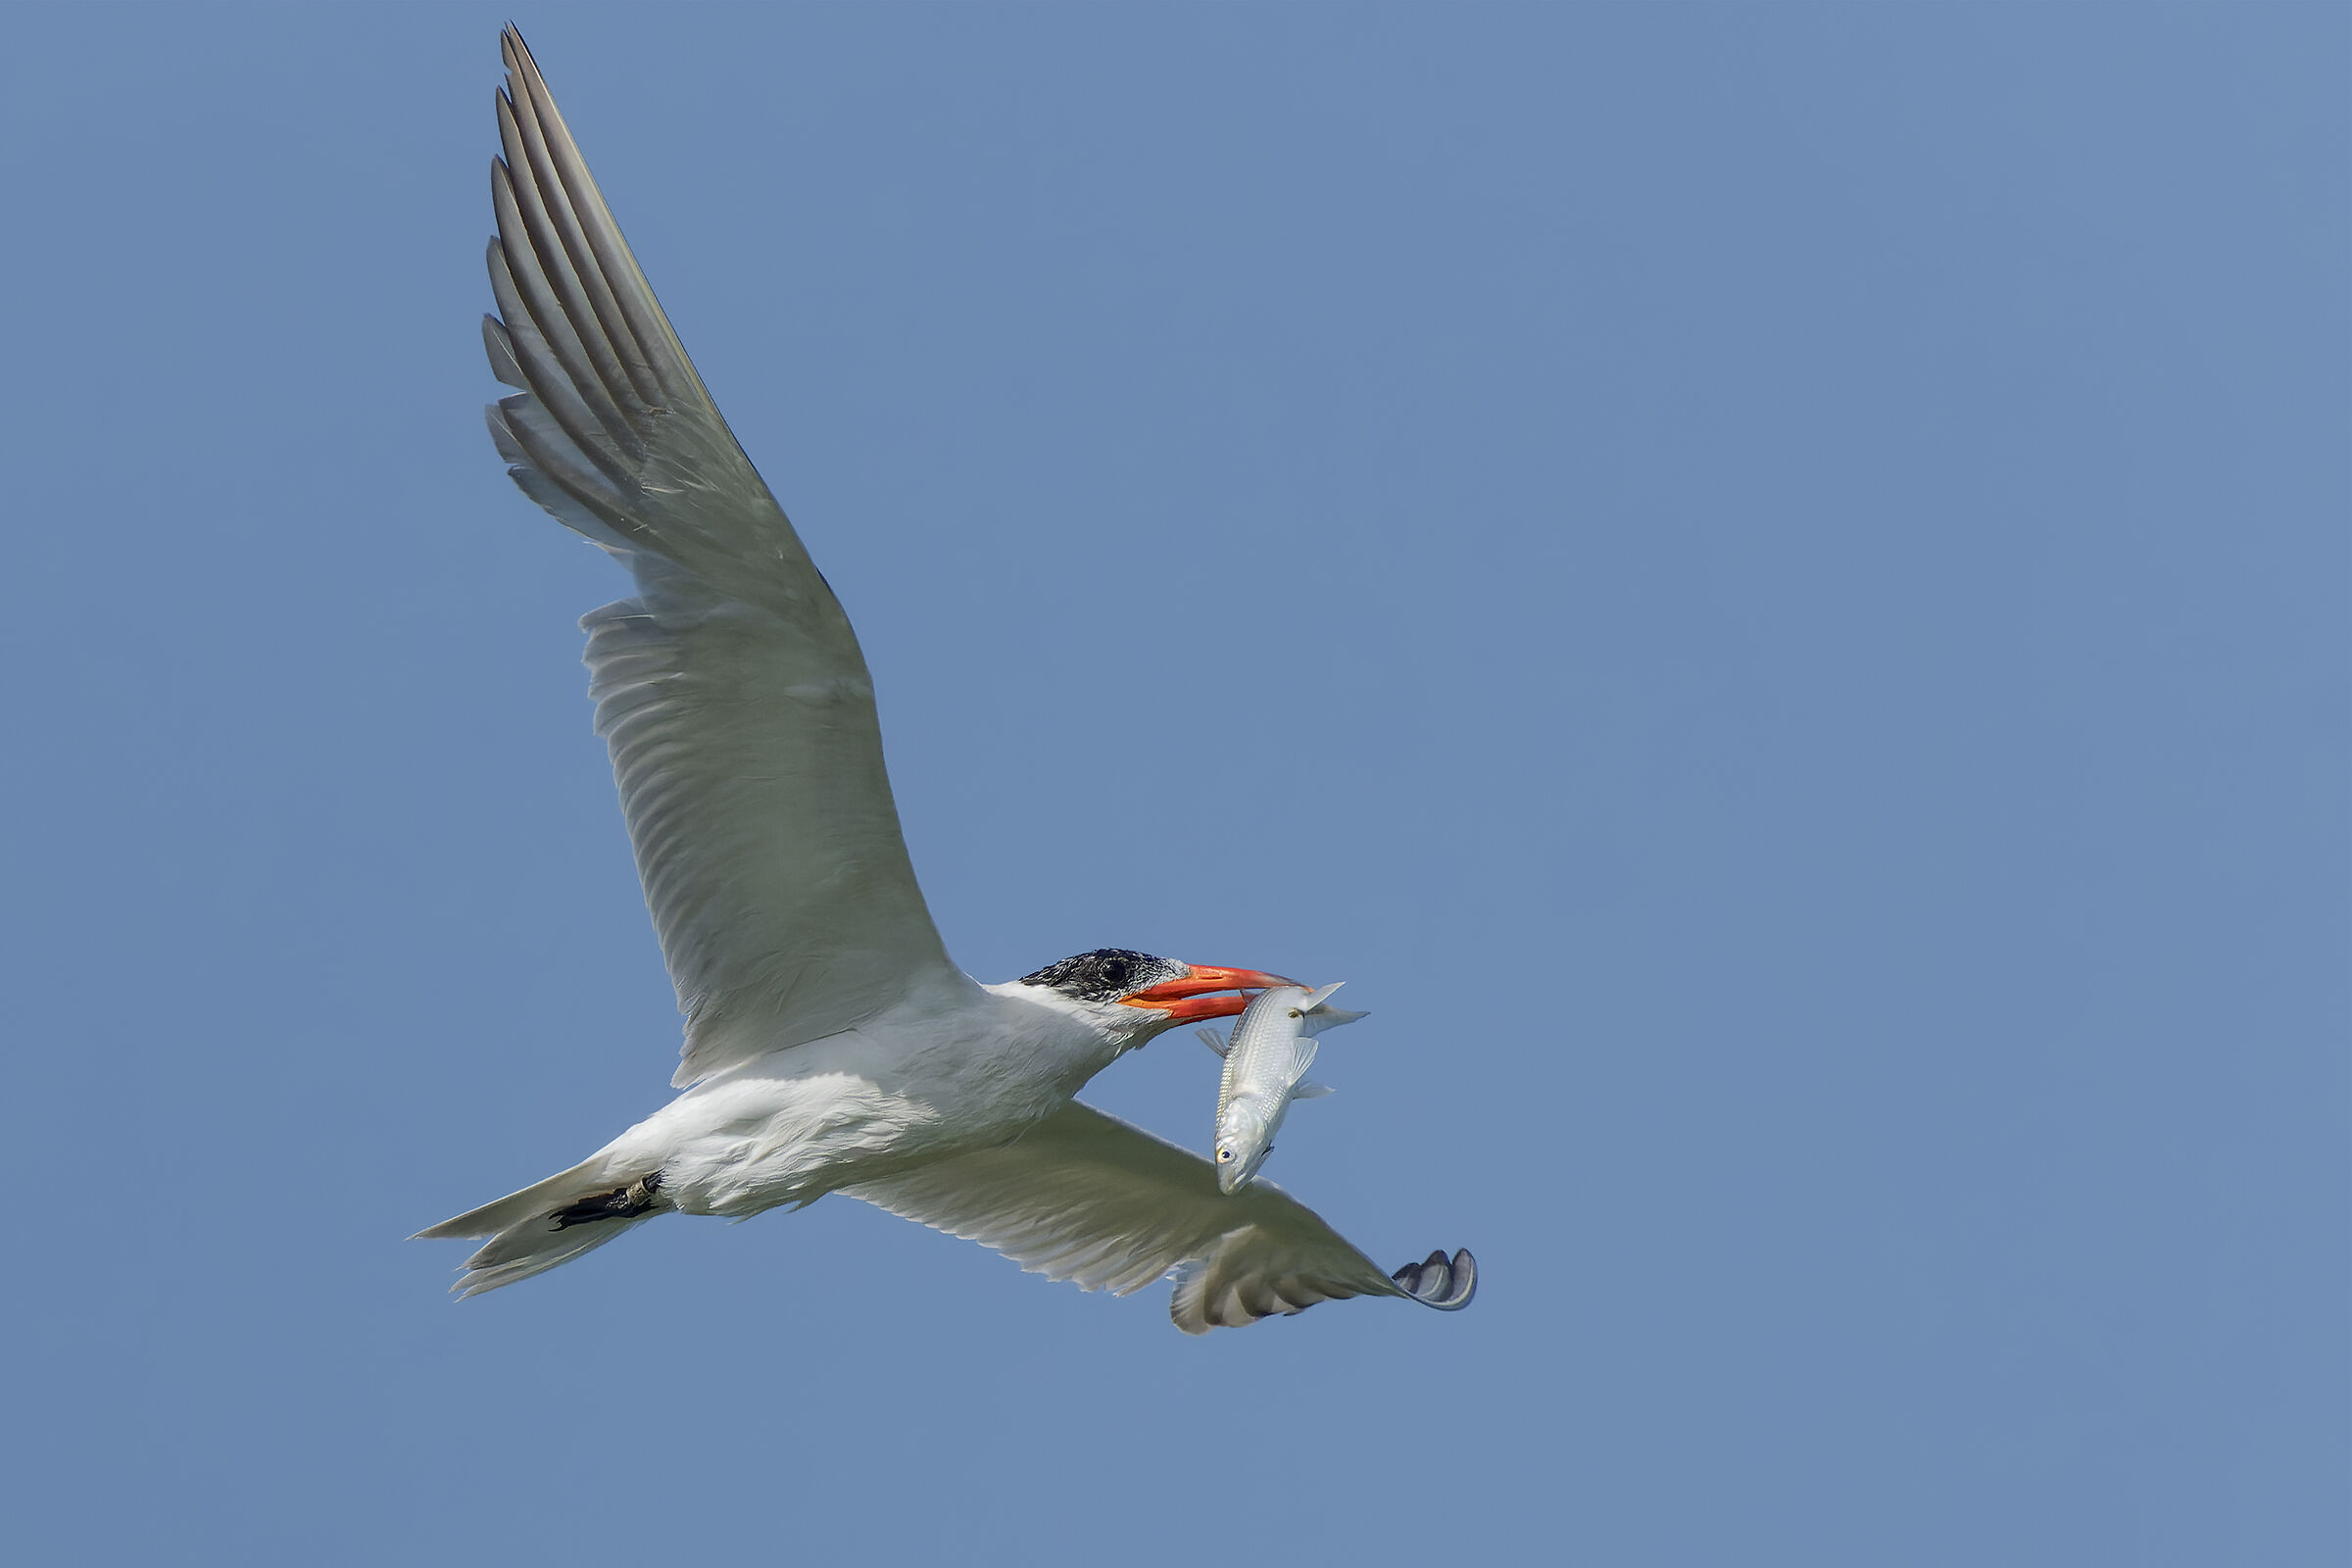 Fishing for the greater tern...